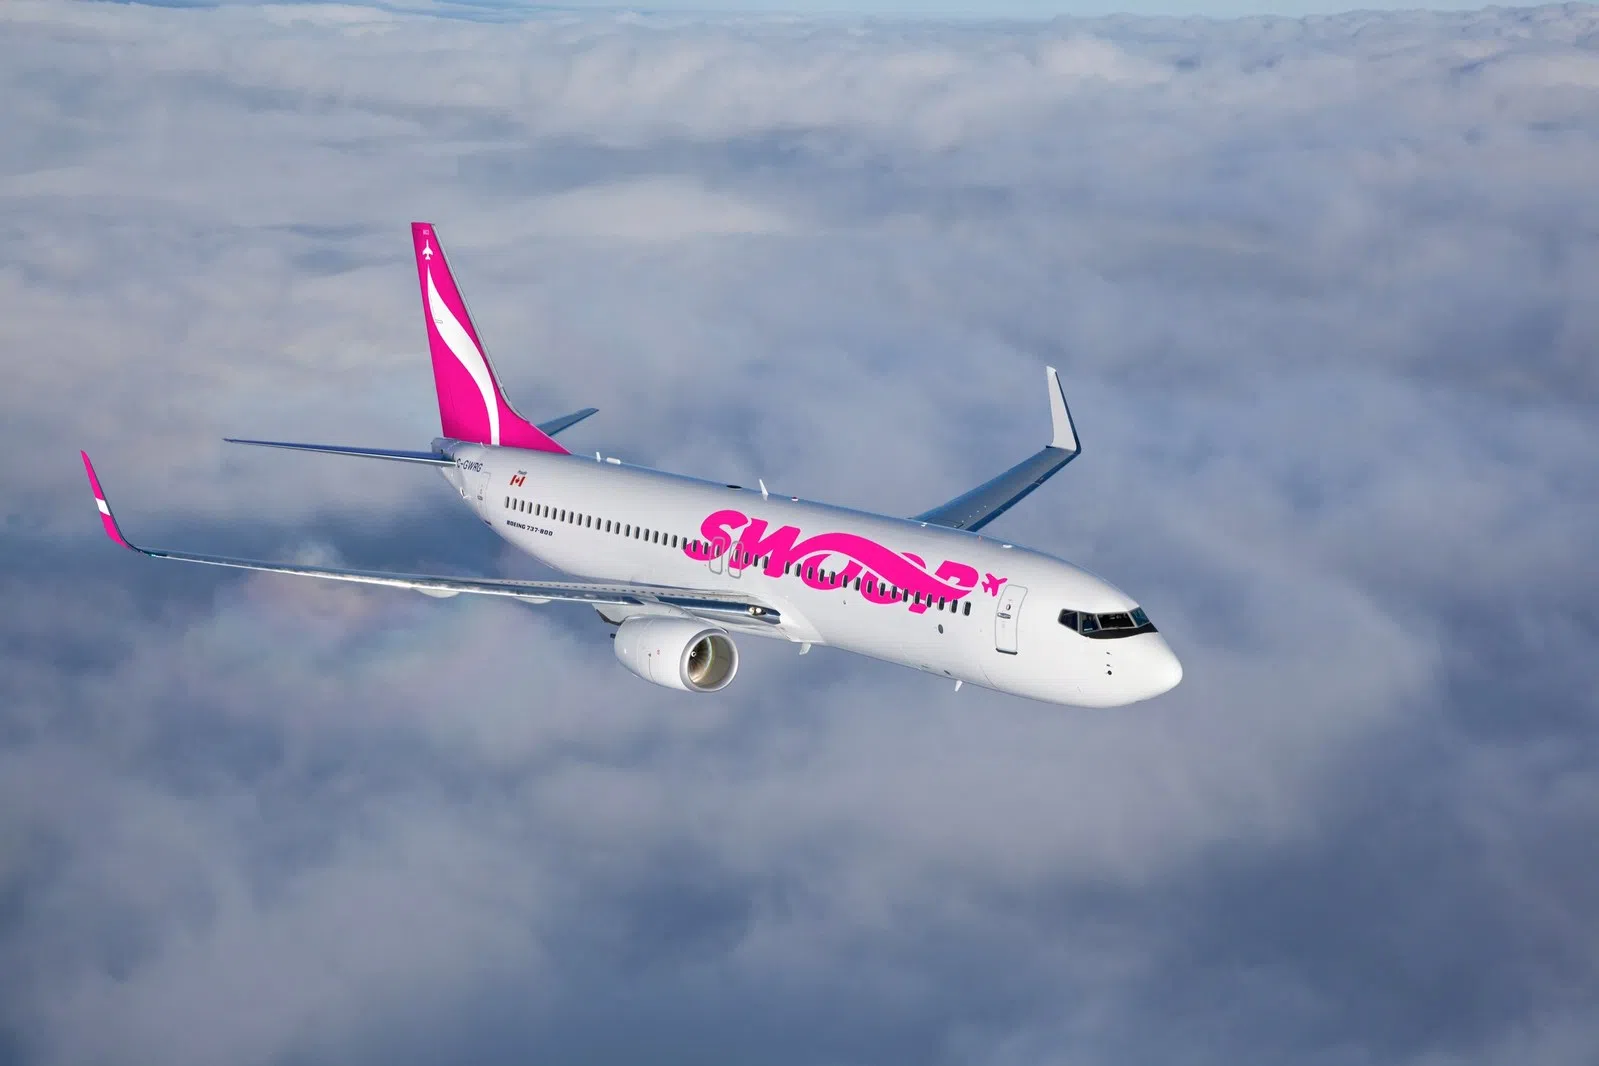 New No-Frills Airline Named